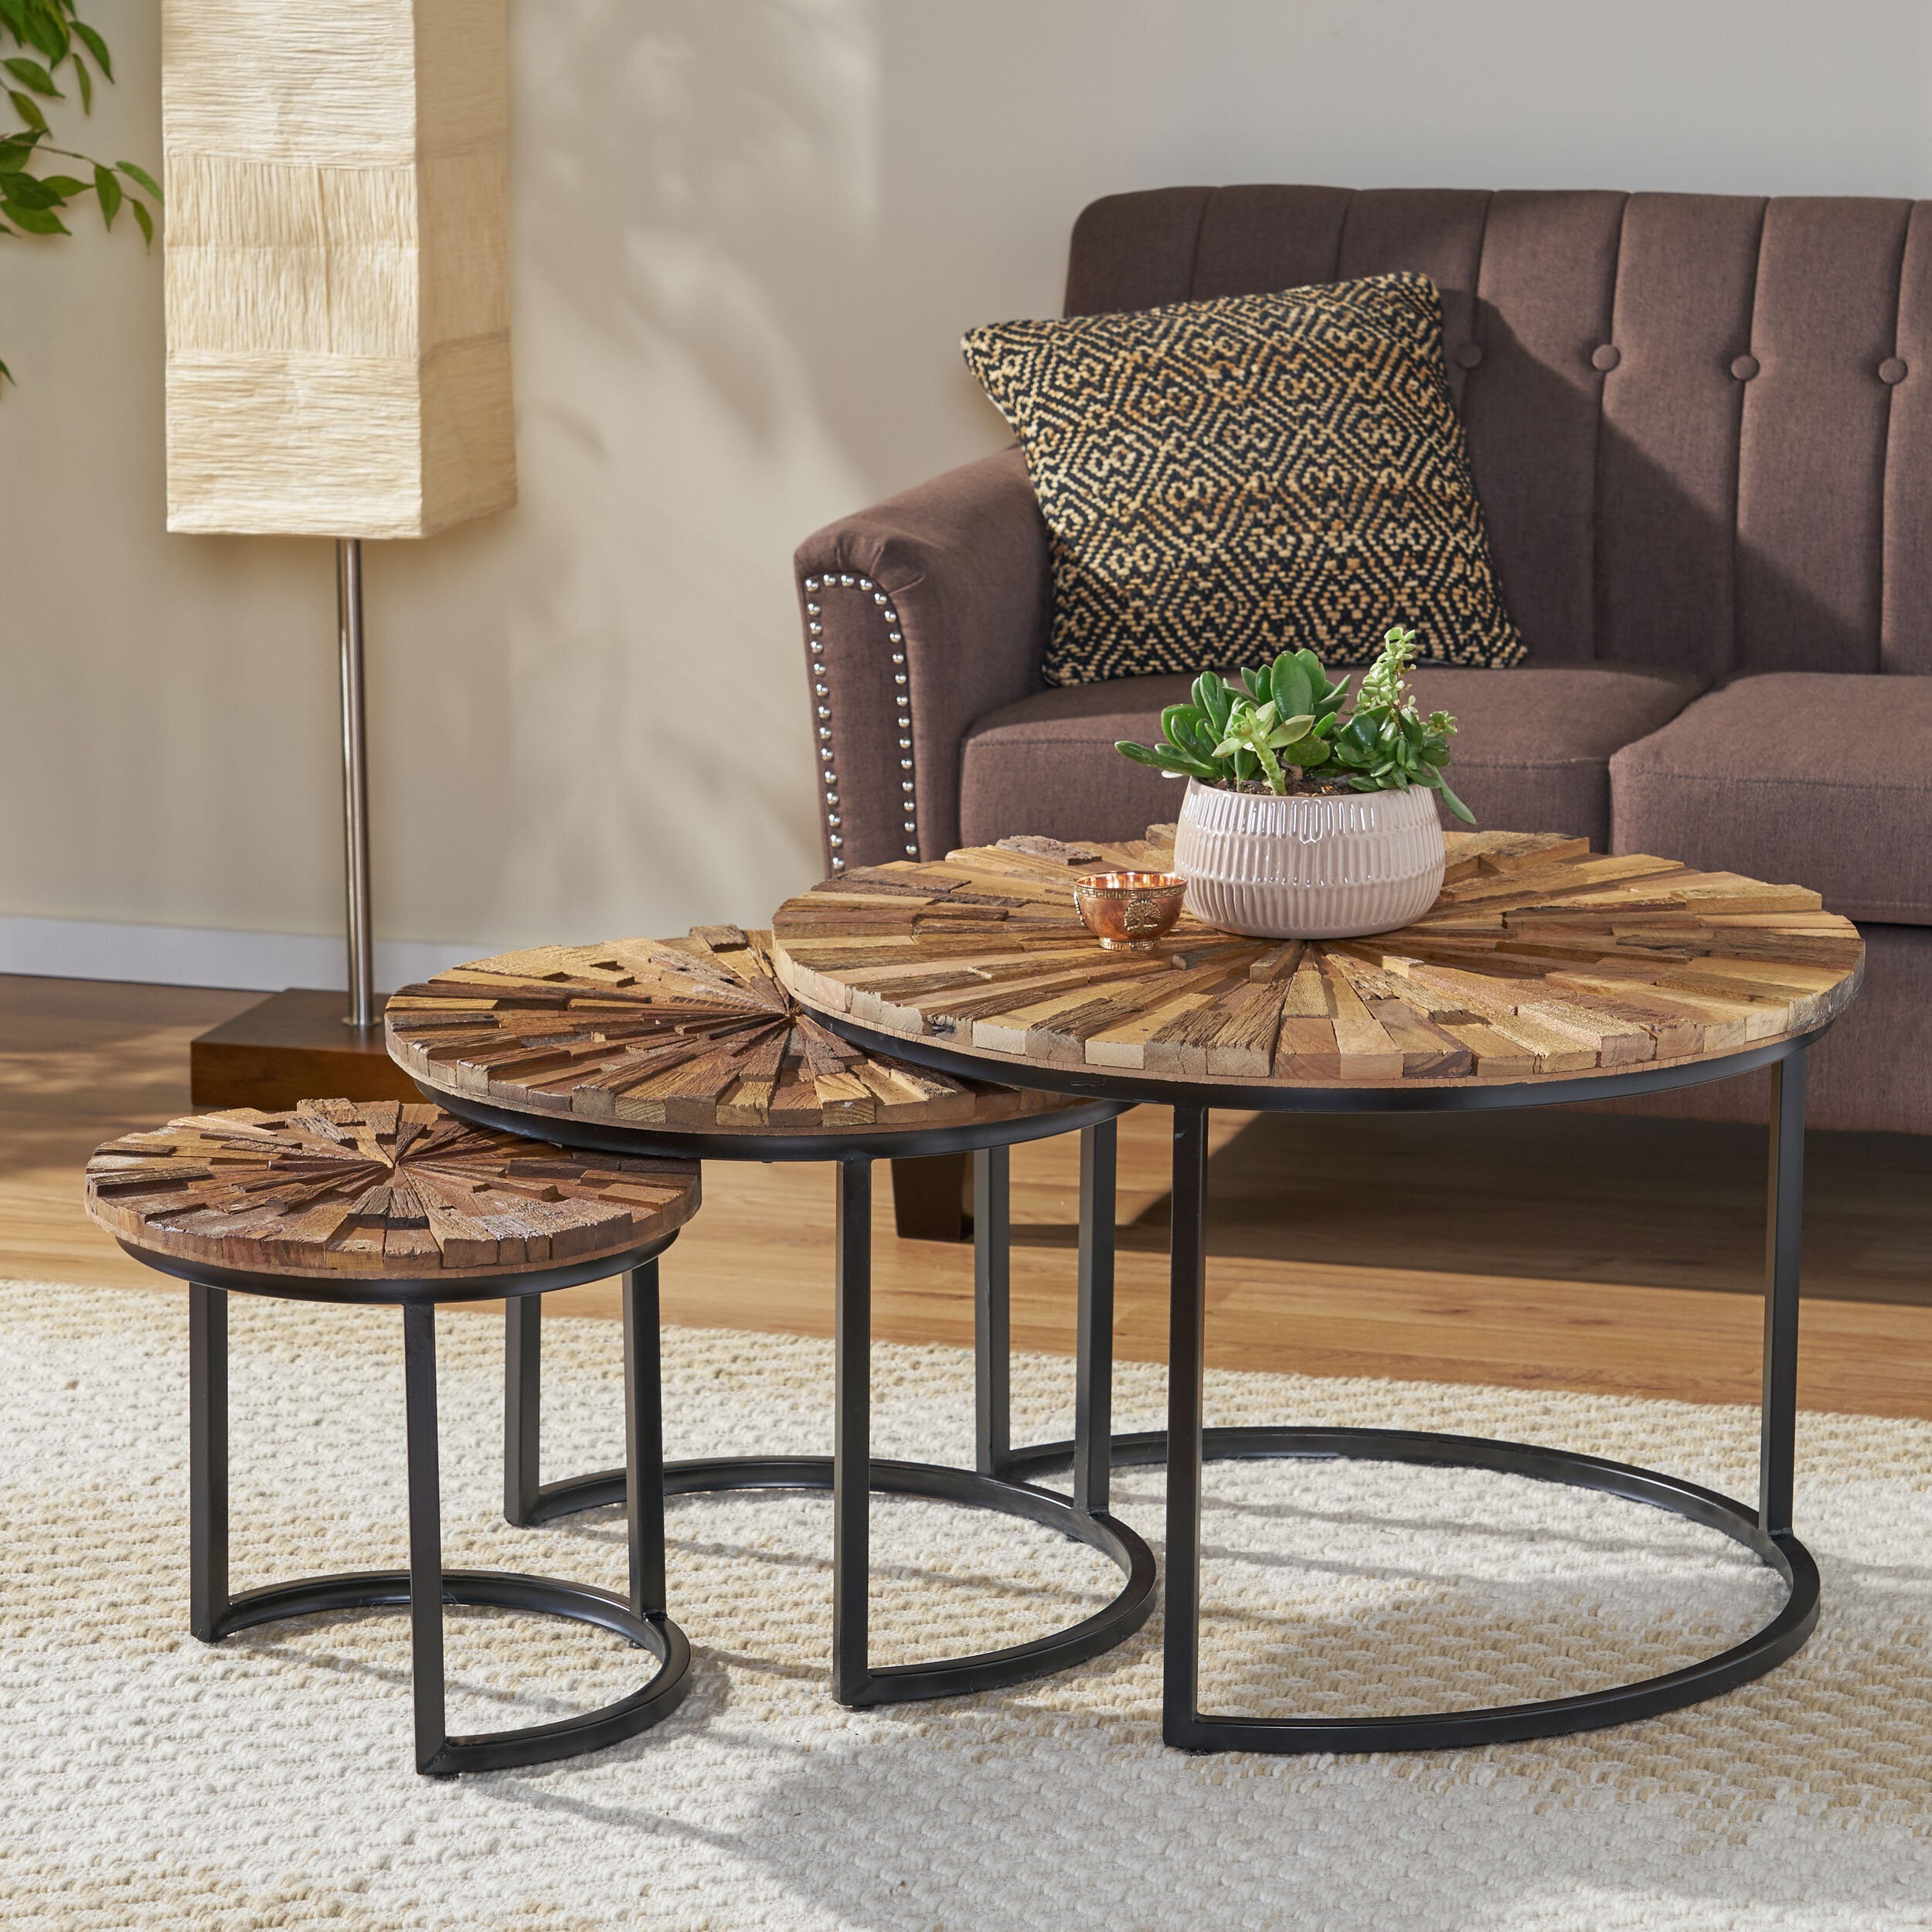 Coffee Table Designs For Small Spaces - Foter